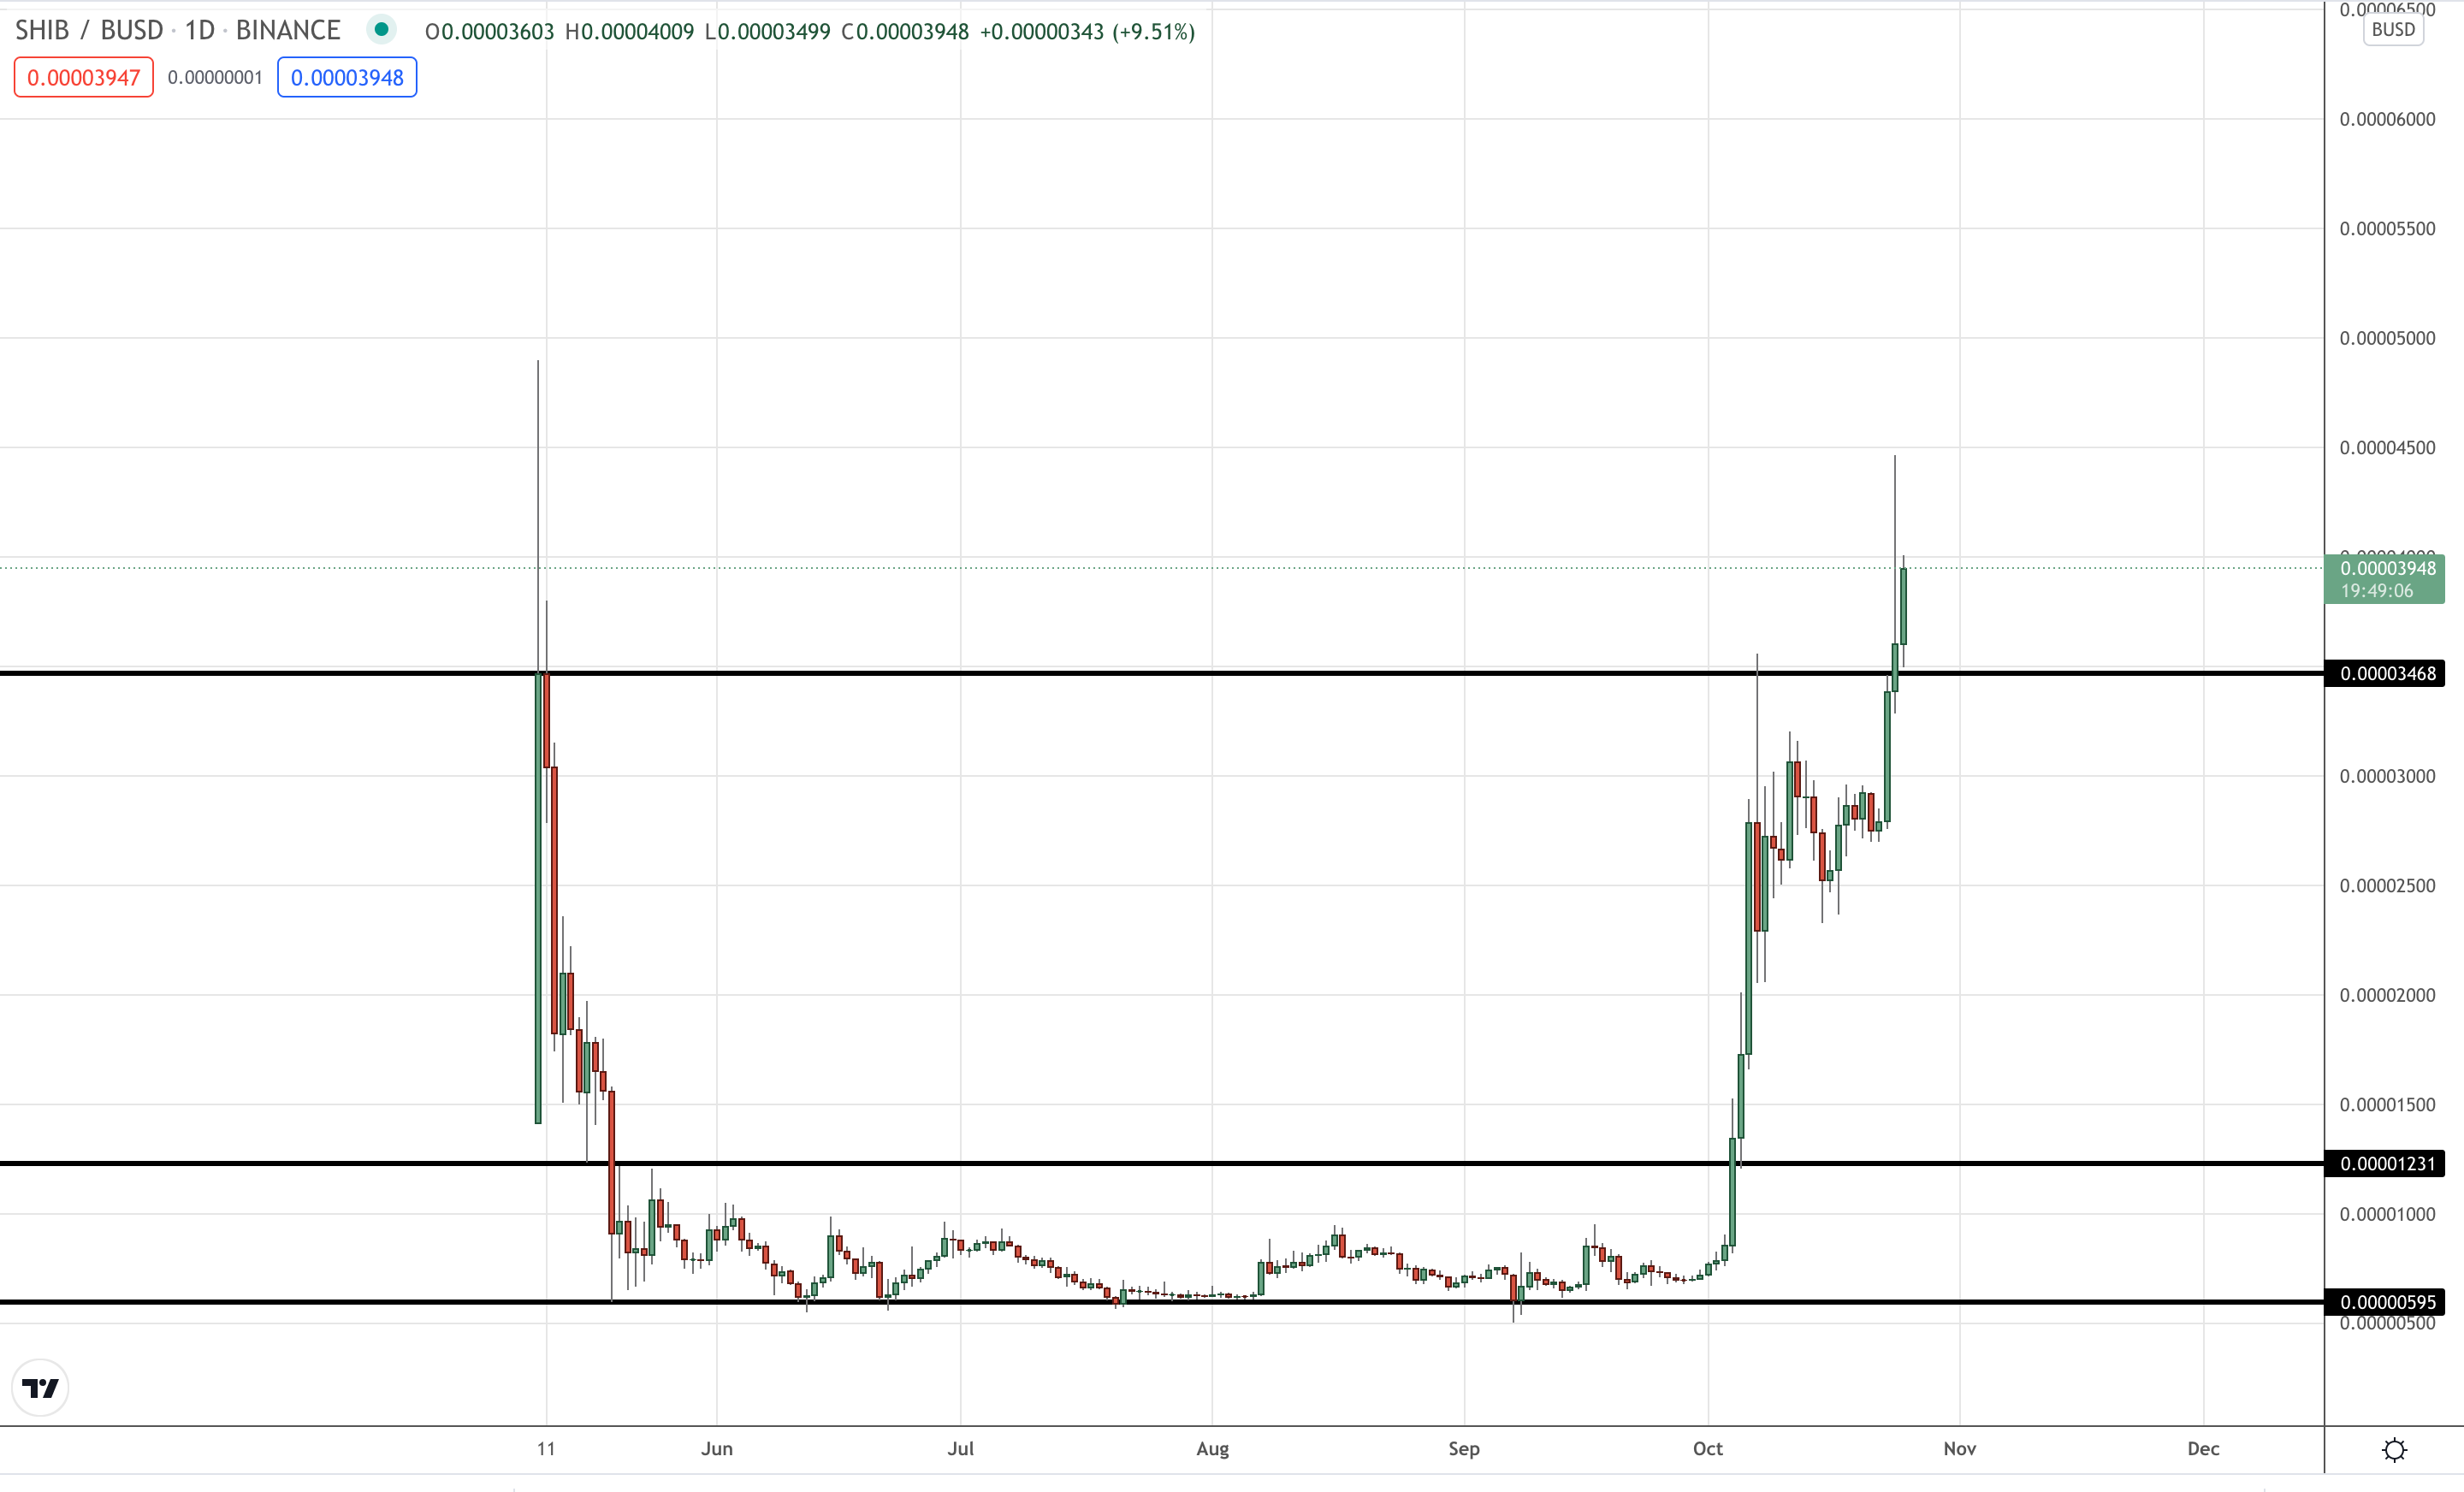 Shiba Inu coin price chart from TradingView showing price going vertically up.